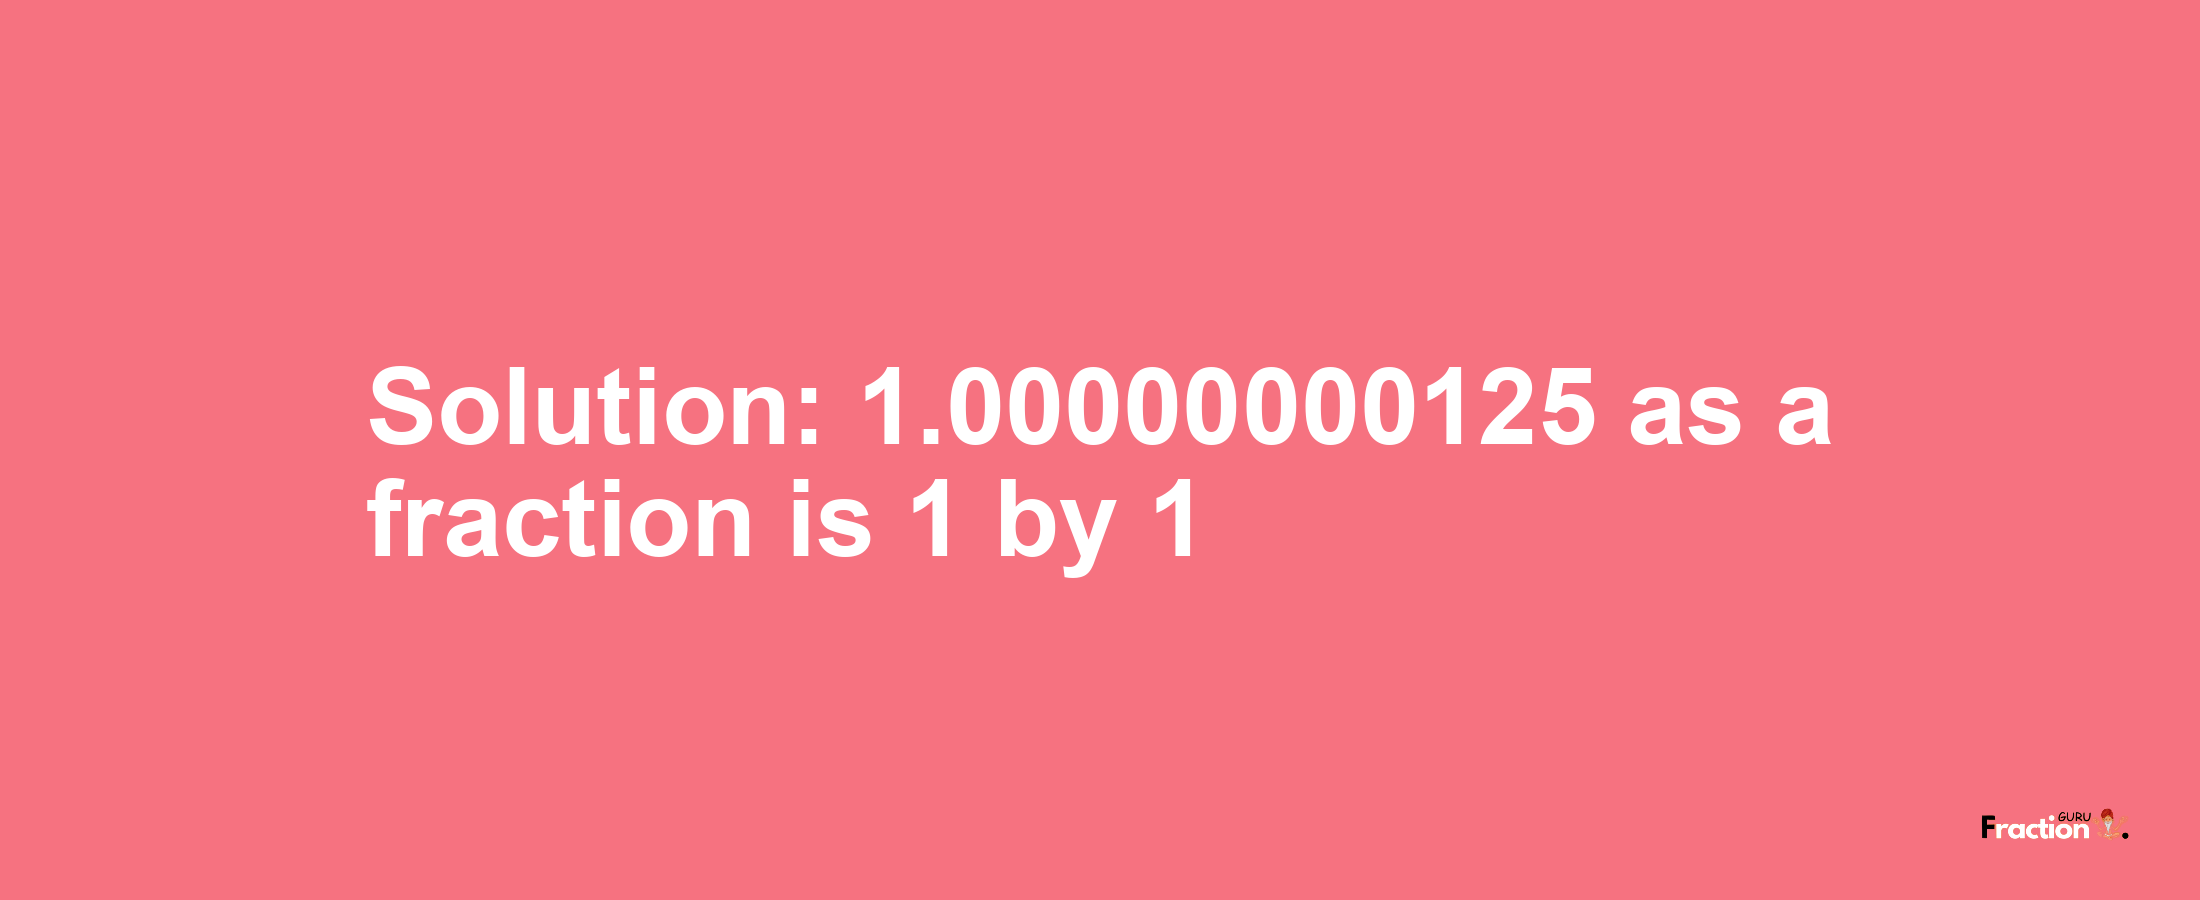 Solution:1.00000000125 as a fraction is 1/1